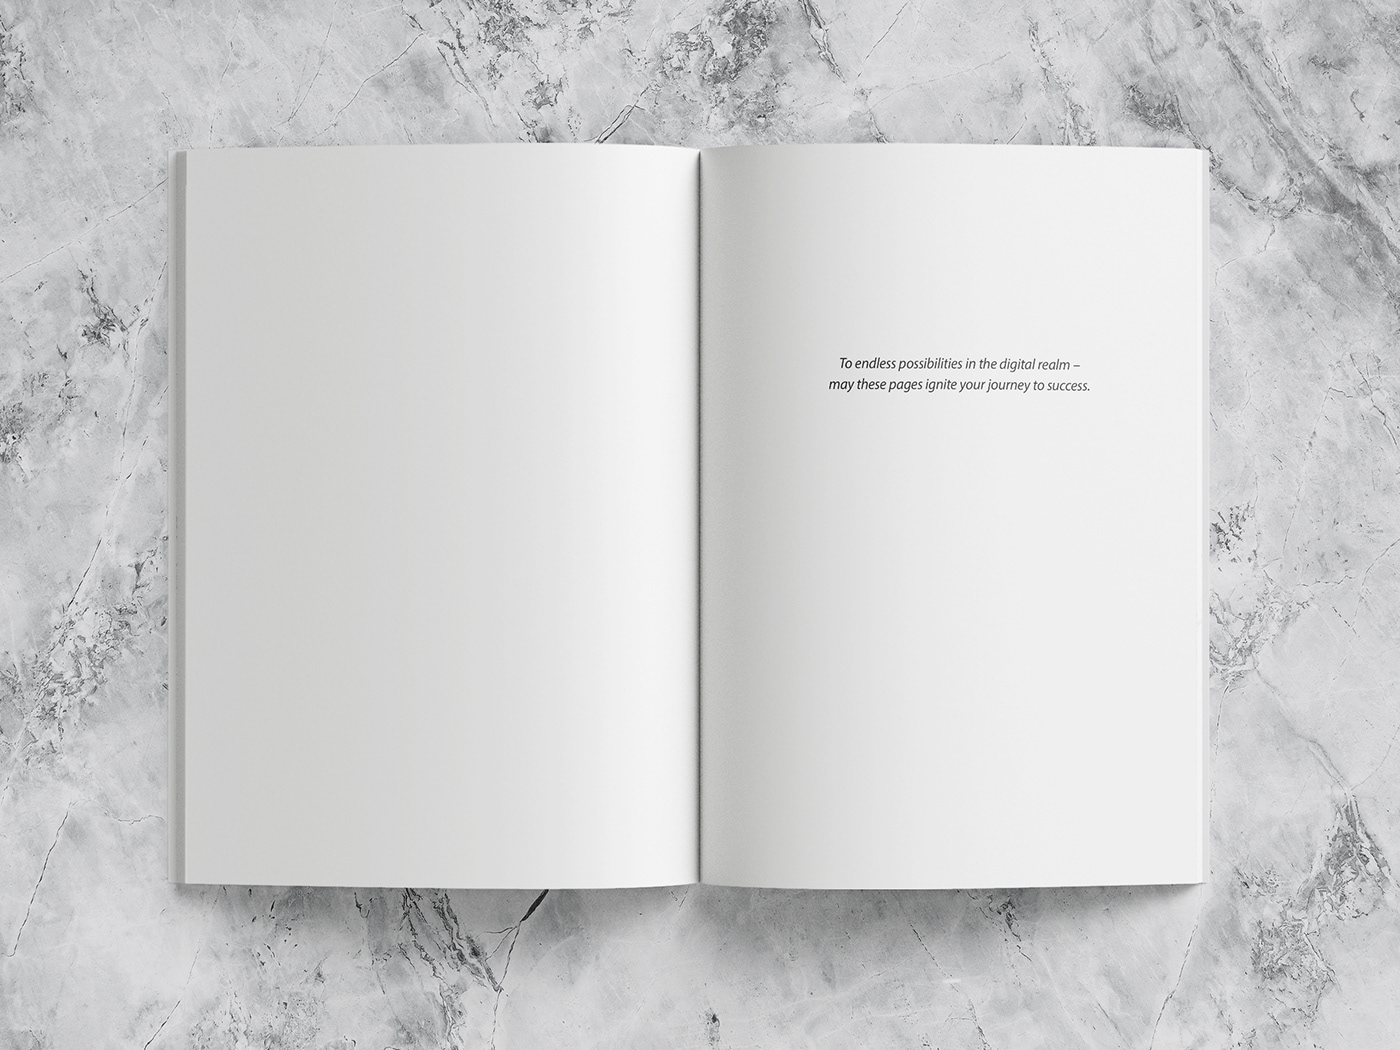 Book mockup – spread: Dedication on the right page.